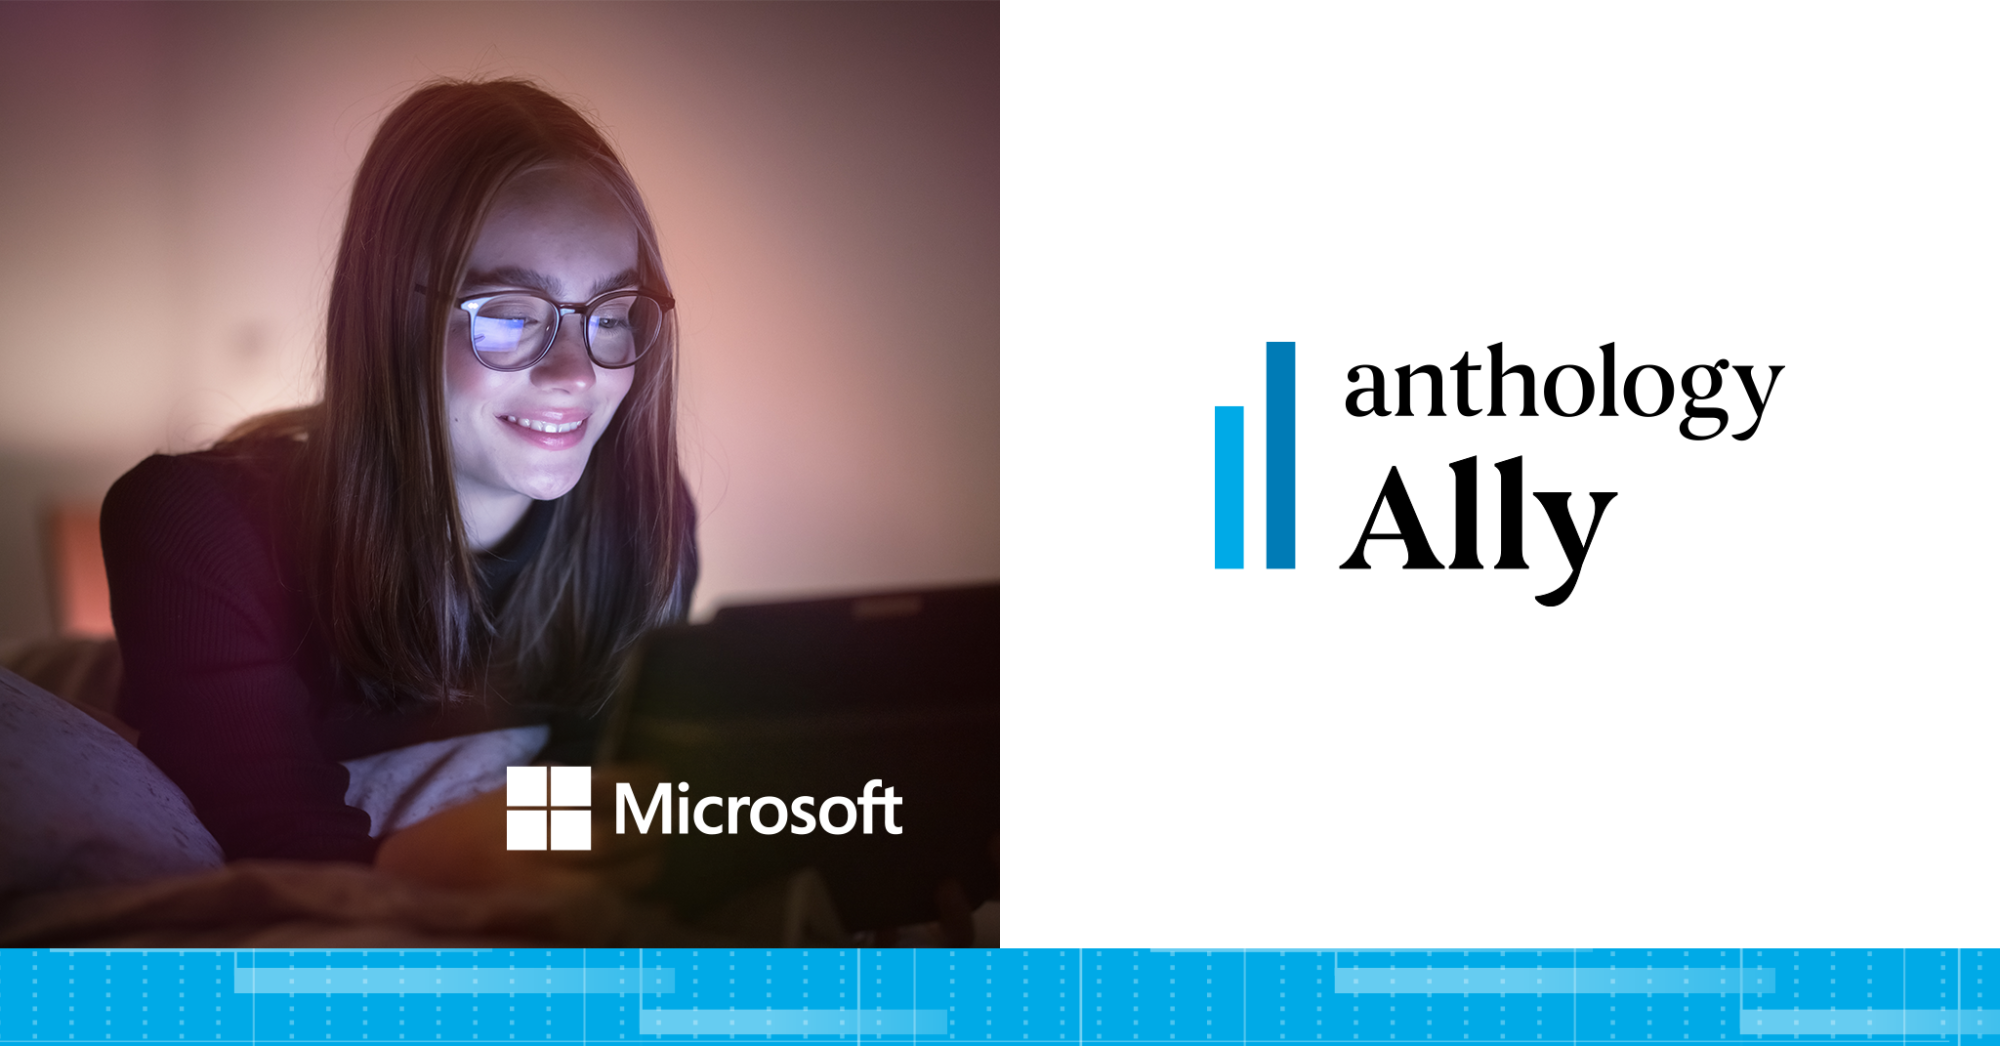 Photo of a woman working with the Microsoft logo overlayed and locked up with the Anthology Ally logo